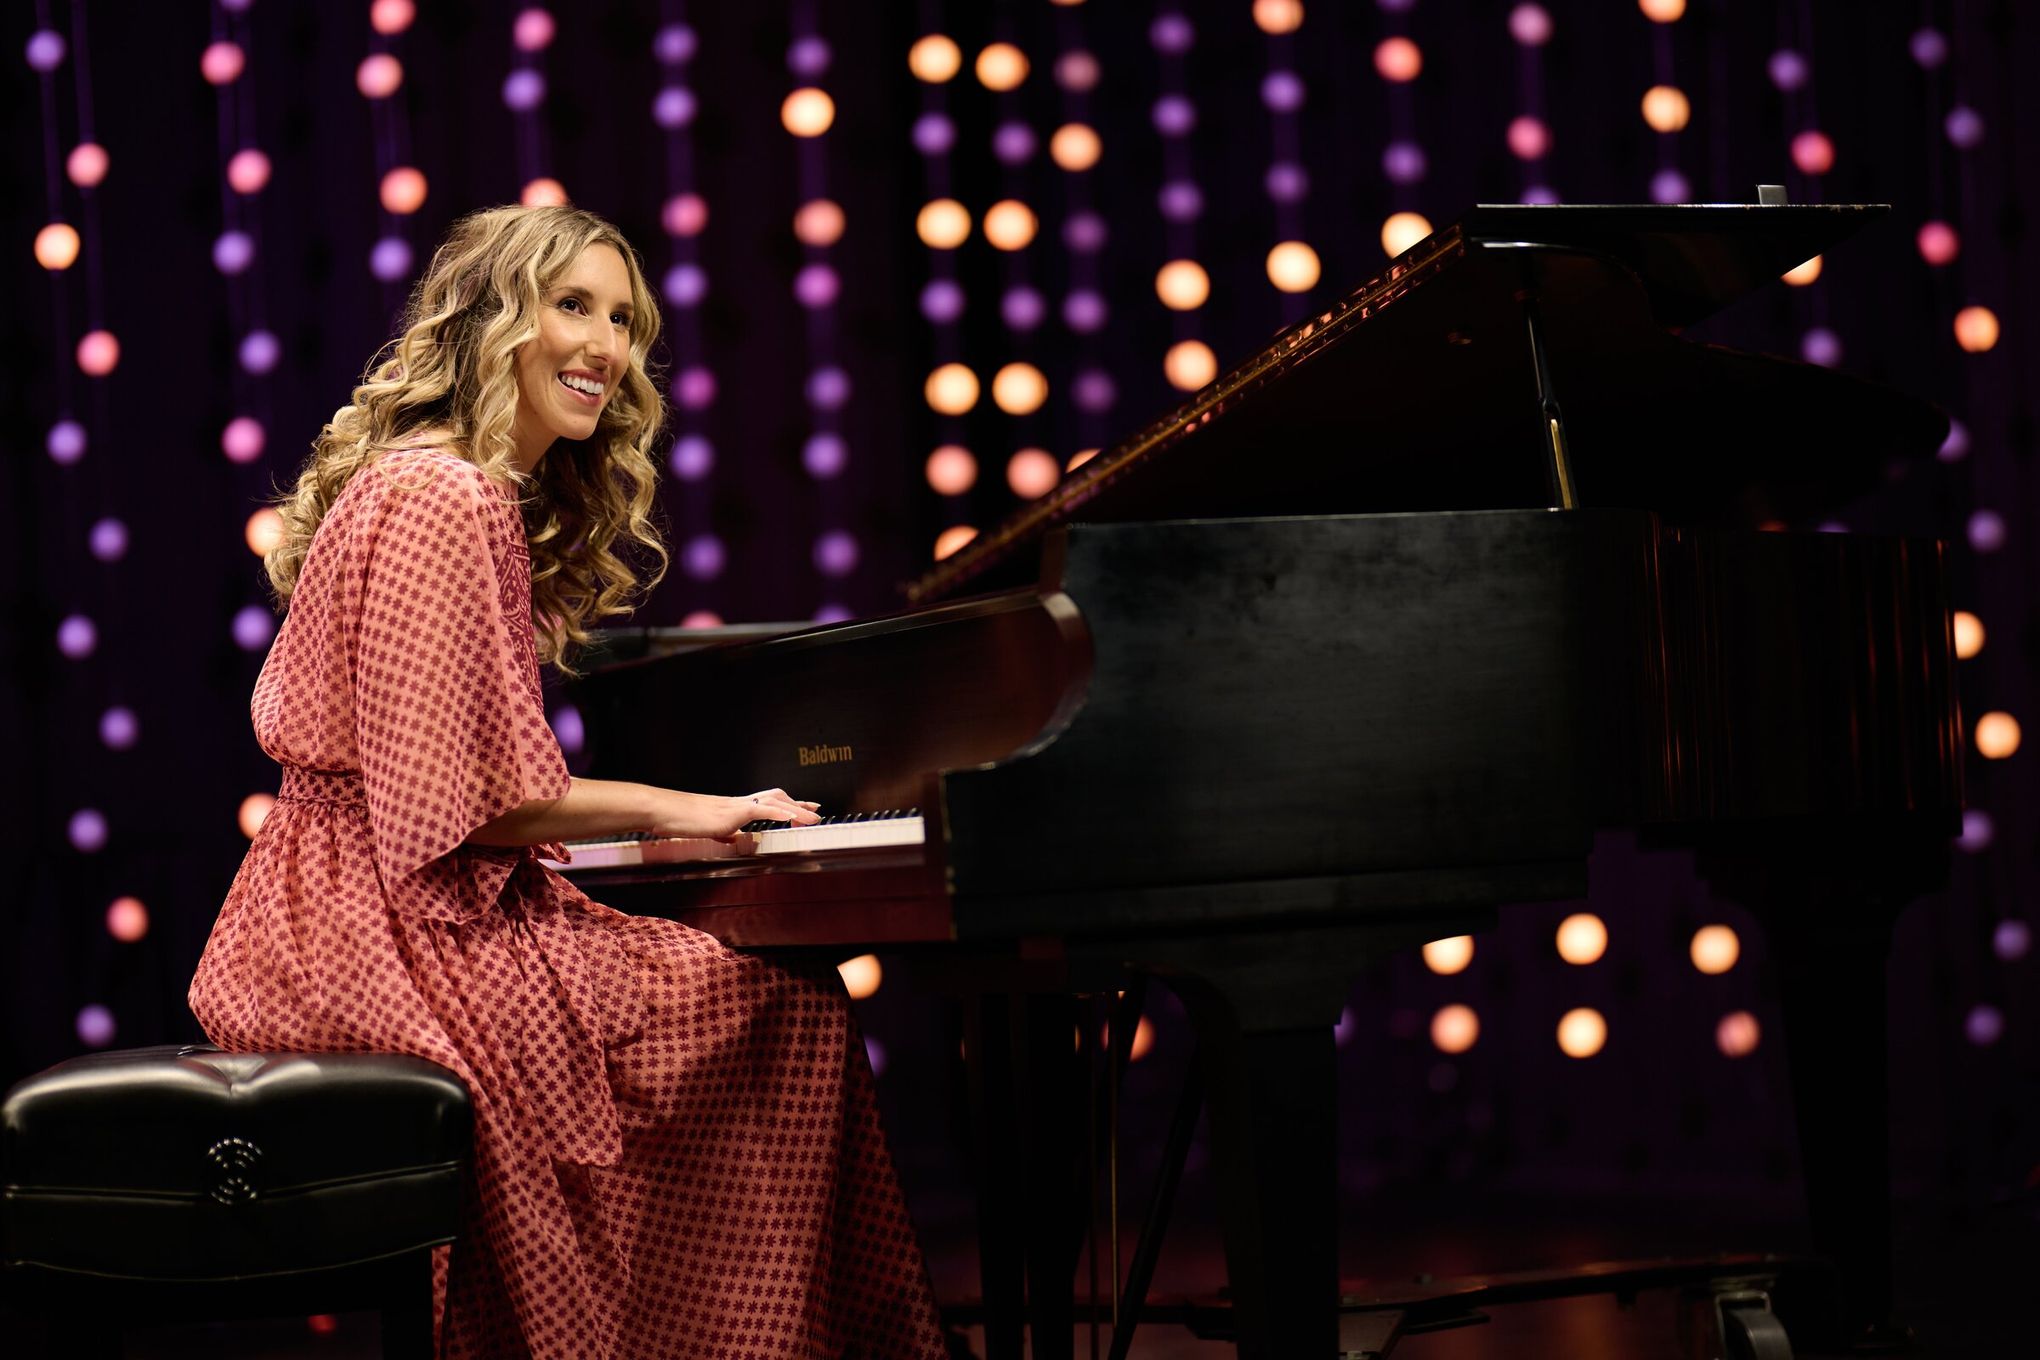 BEAUTIFUL: The Carole King Musical - Village Theatre